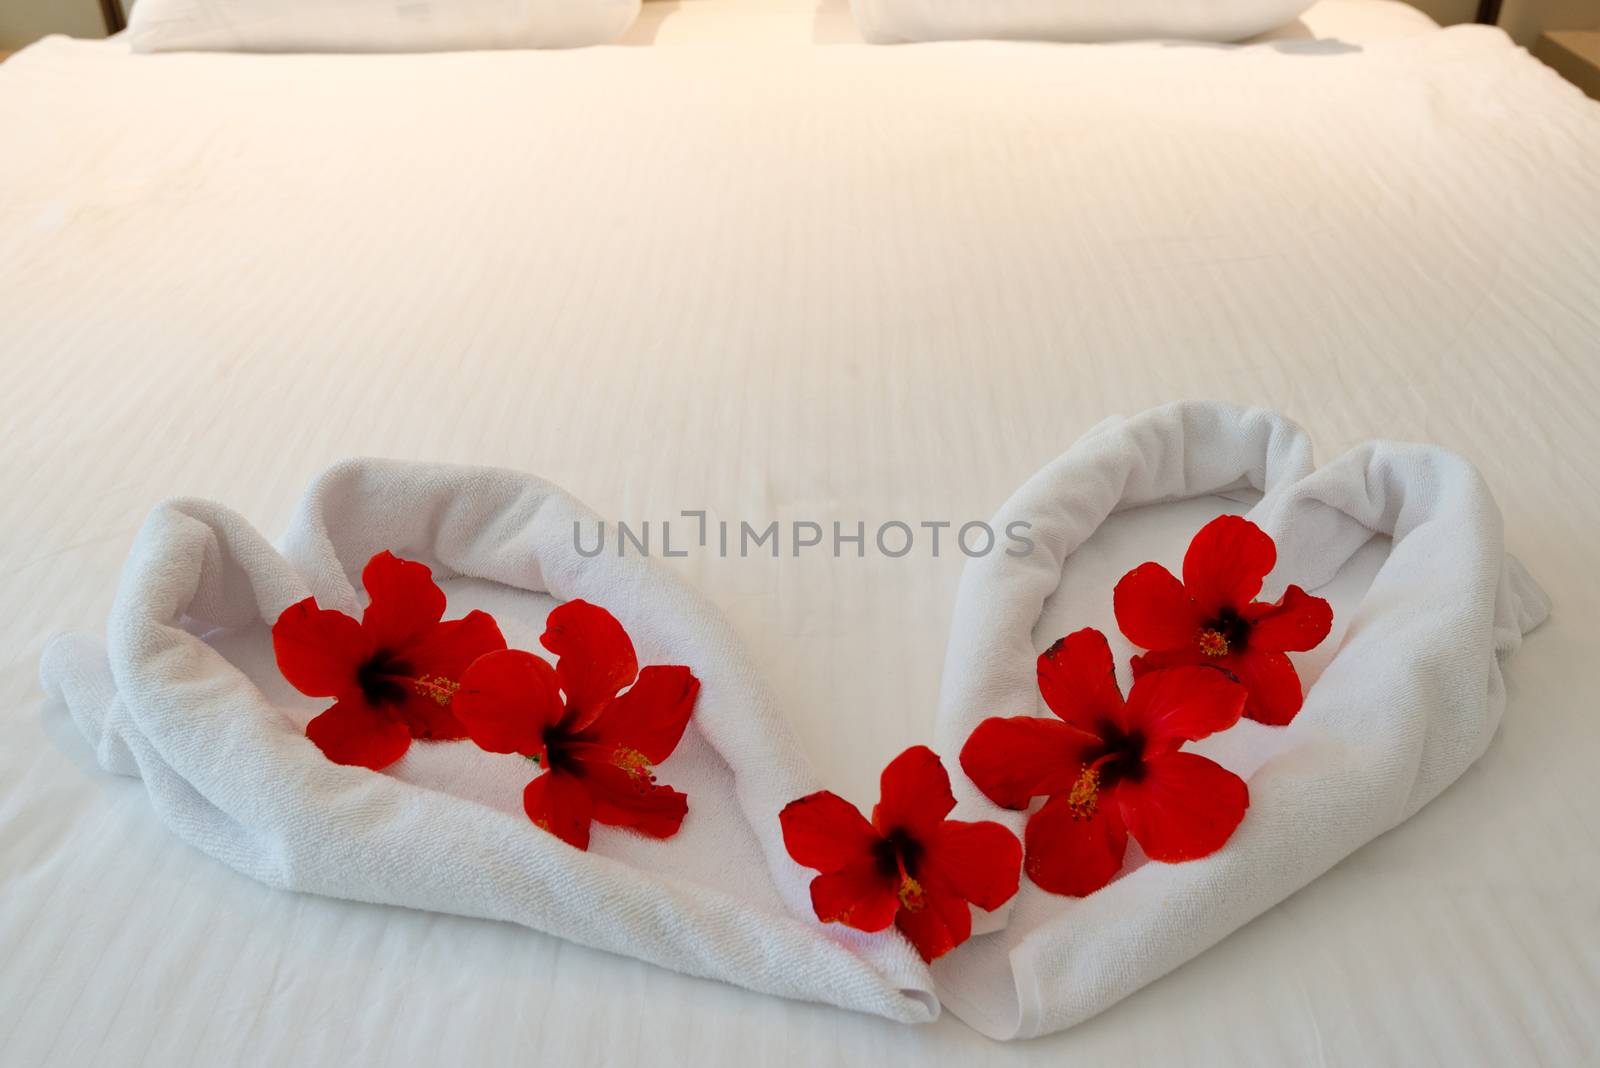 heart made from towels on honeymoon bed by franky242